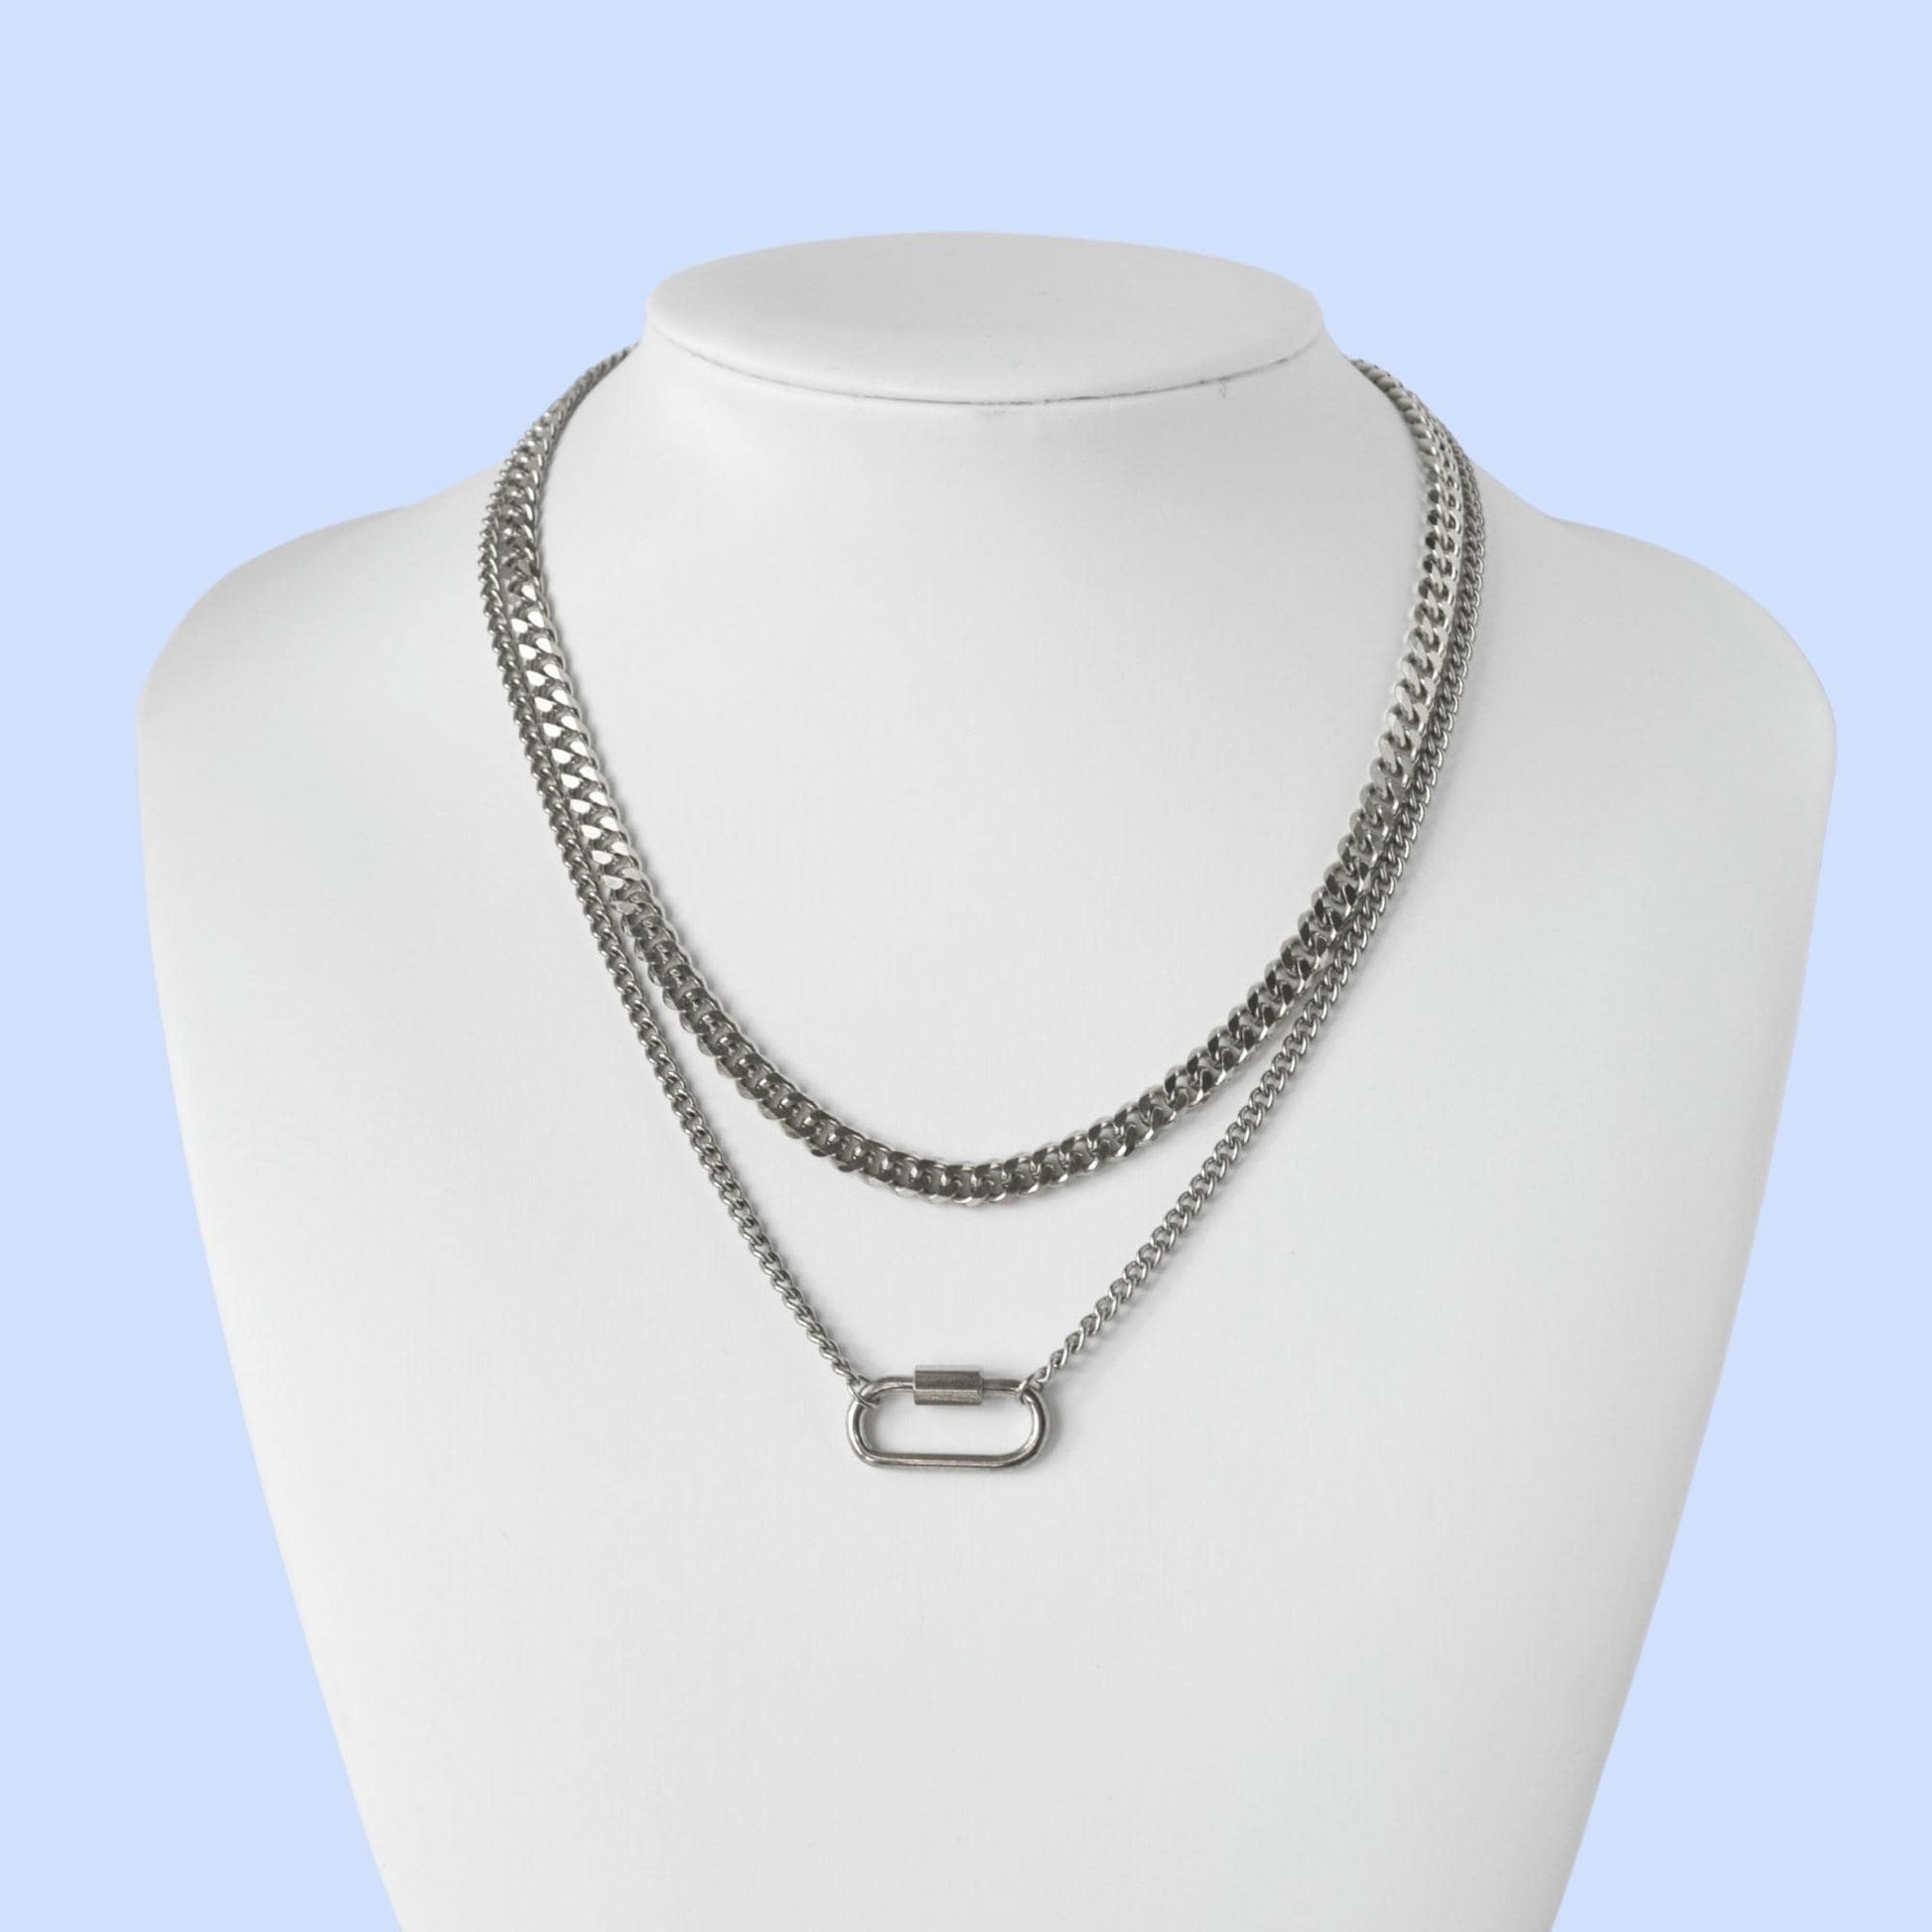 Sallee Necklace - Cuban Carabiner, Sterling Silver with Pavee CZs 18K Gold Plate / 30